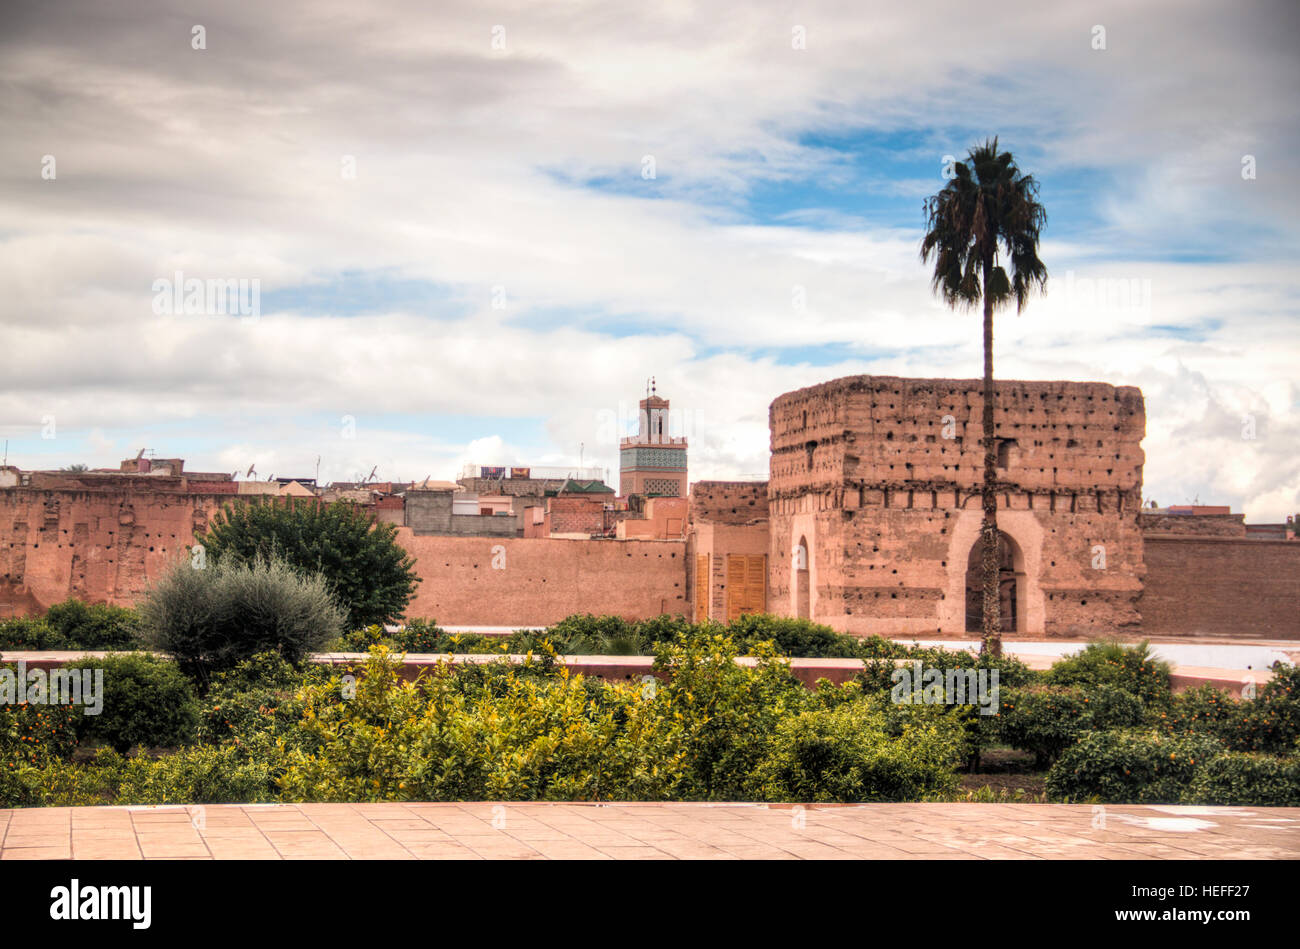 Inside the ancient palace of Bab Agnaou, one of the main attractions of Marrakesh in Morocoo Stock Photo